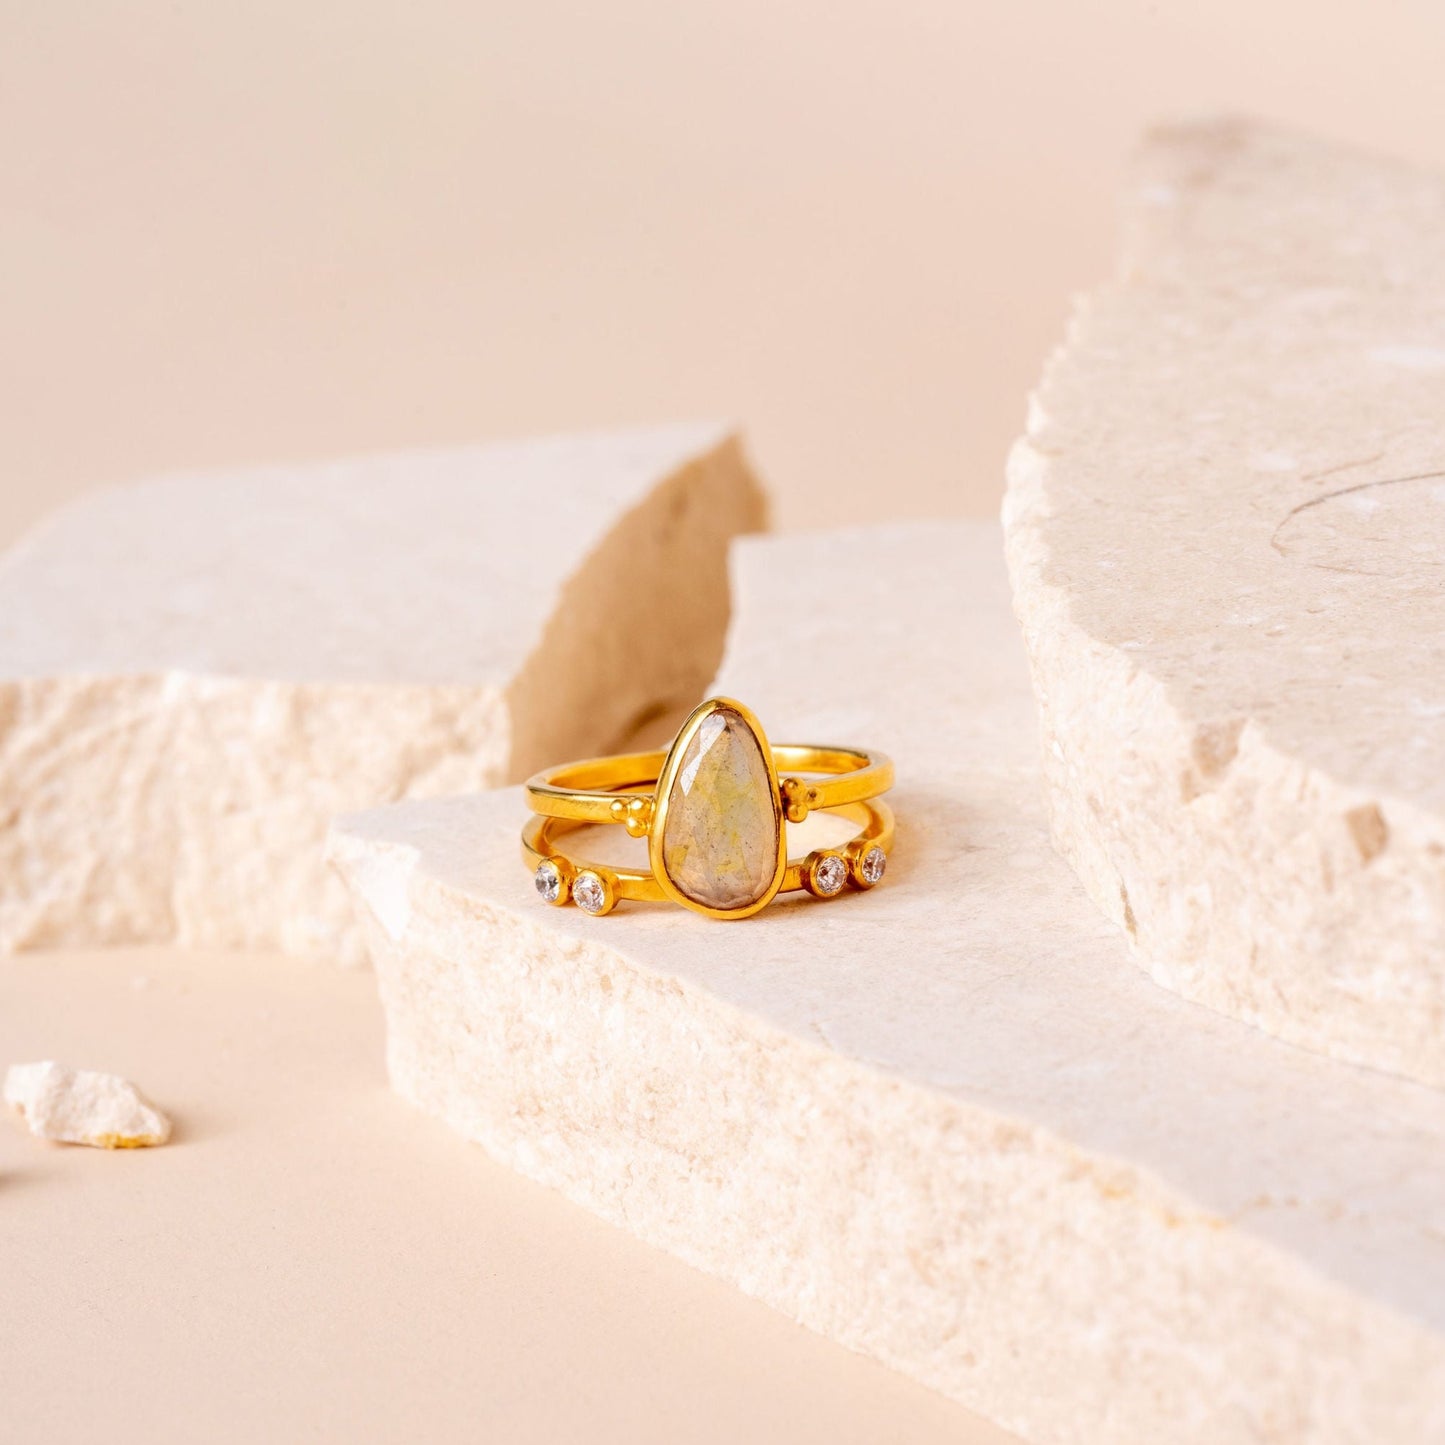 Artisanal gold ring with granulation detailing, complemented by a beautiful light yellow teardrop sapphire."